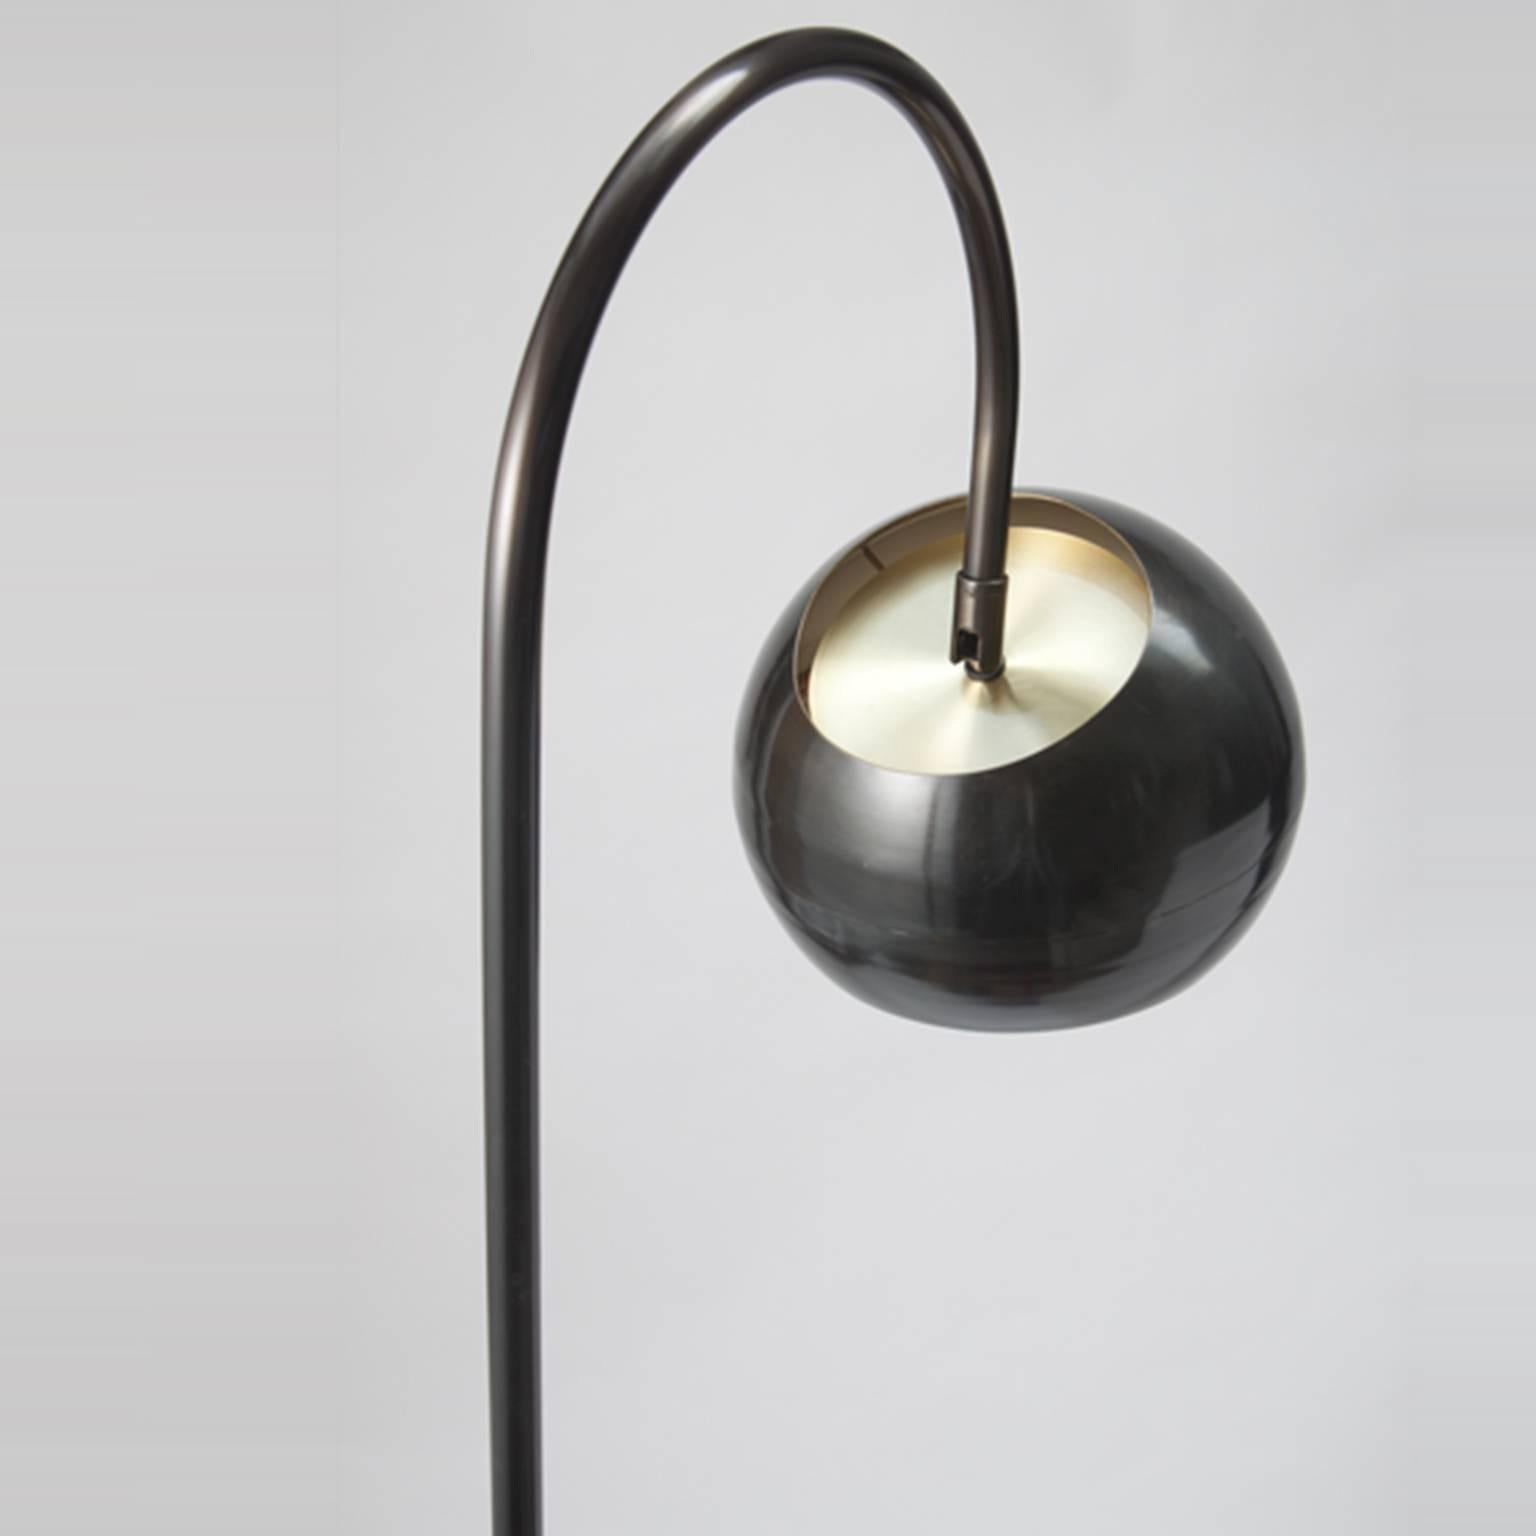 Desigual Brass Powder Coated Floor Lamp
Material: Brass
Color: Dark bronze
Shade: 8″ D
Base: 10″ D x 58 1/2″ H
Additional custom sizes and finishes available upon request
Made in New York City